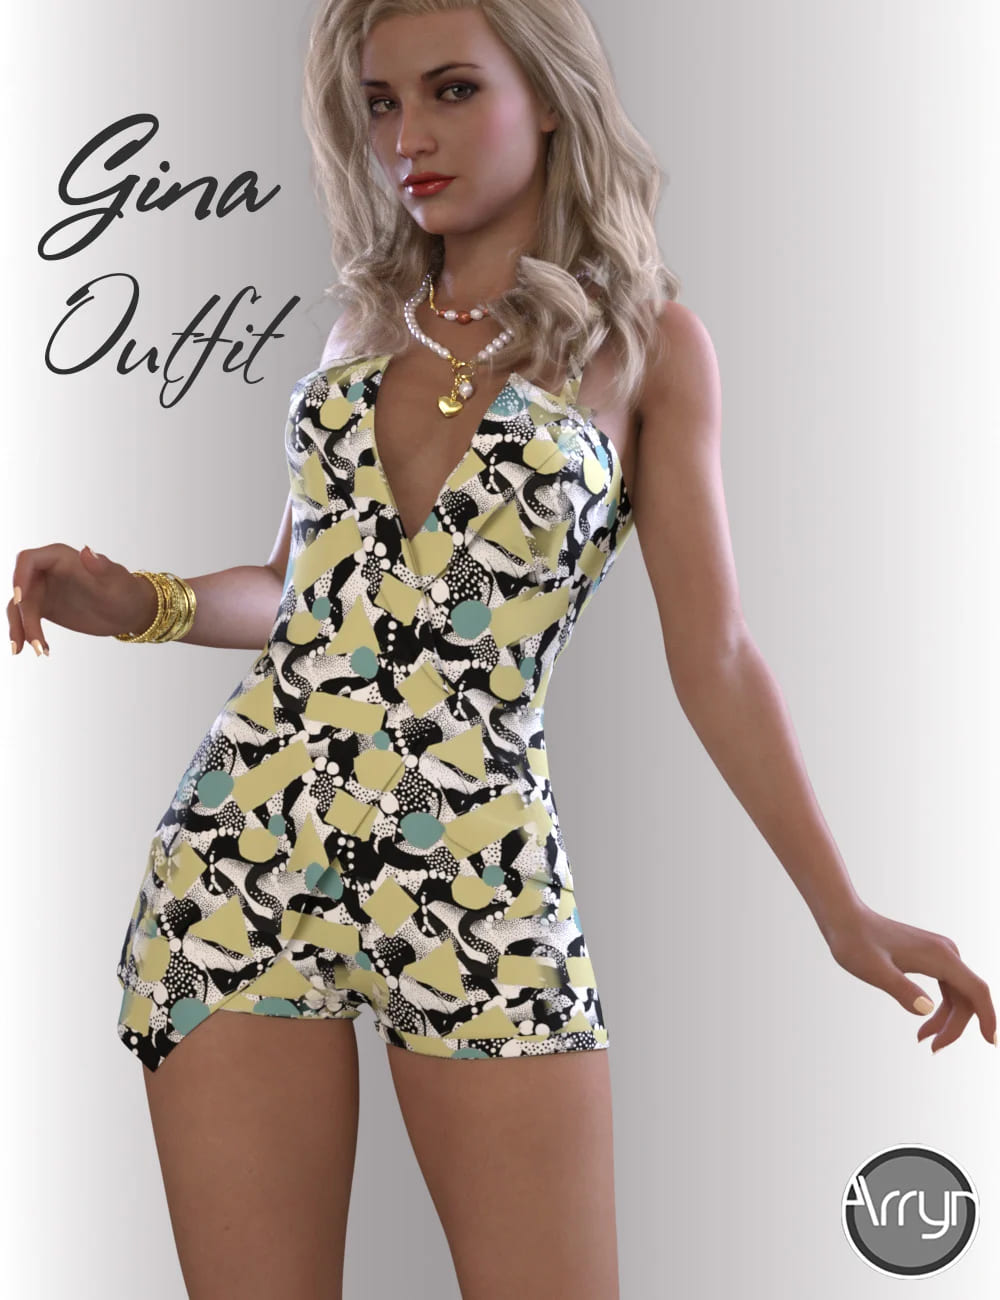 dForce Gina Outfit for Genesis 8.1 Females_DAZ3D下载站